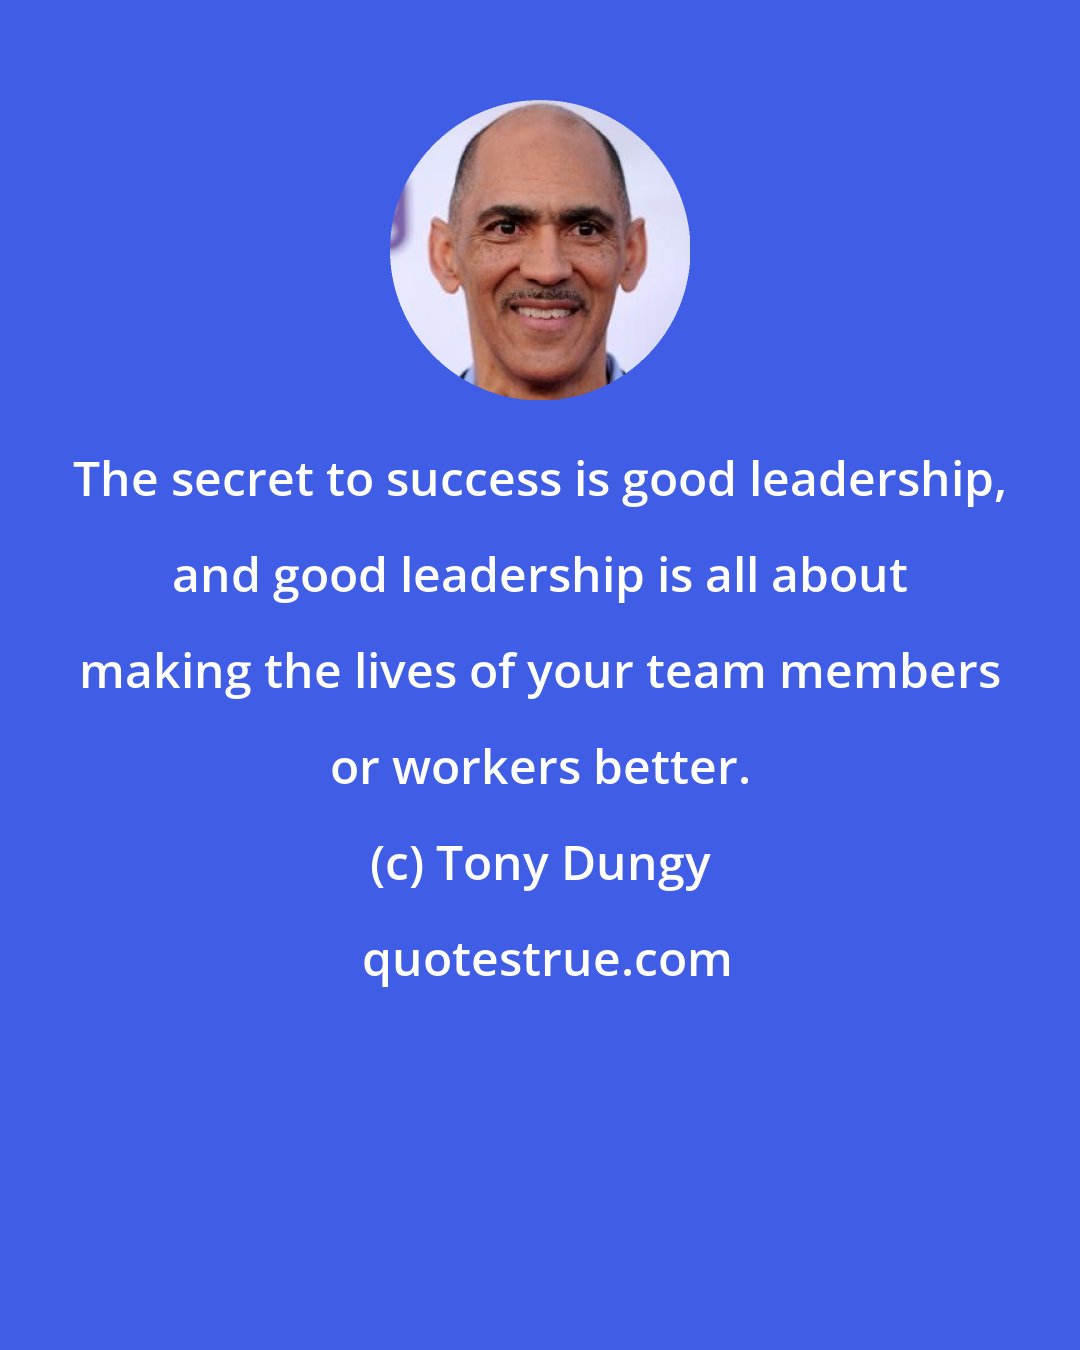 Tony Dungy: The secret to success is good leadership, and good leadership is all about making the lives of your team members or workers better.